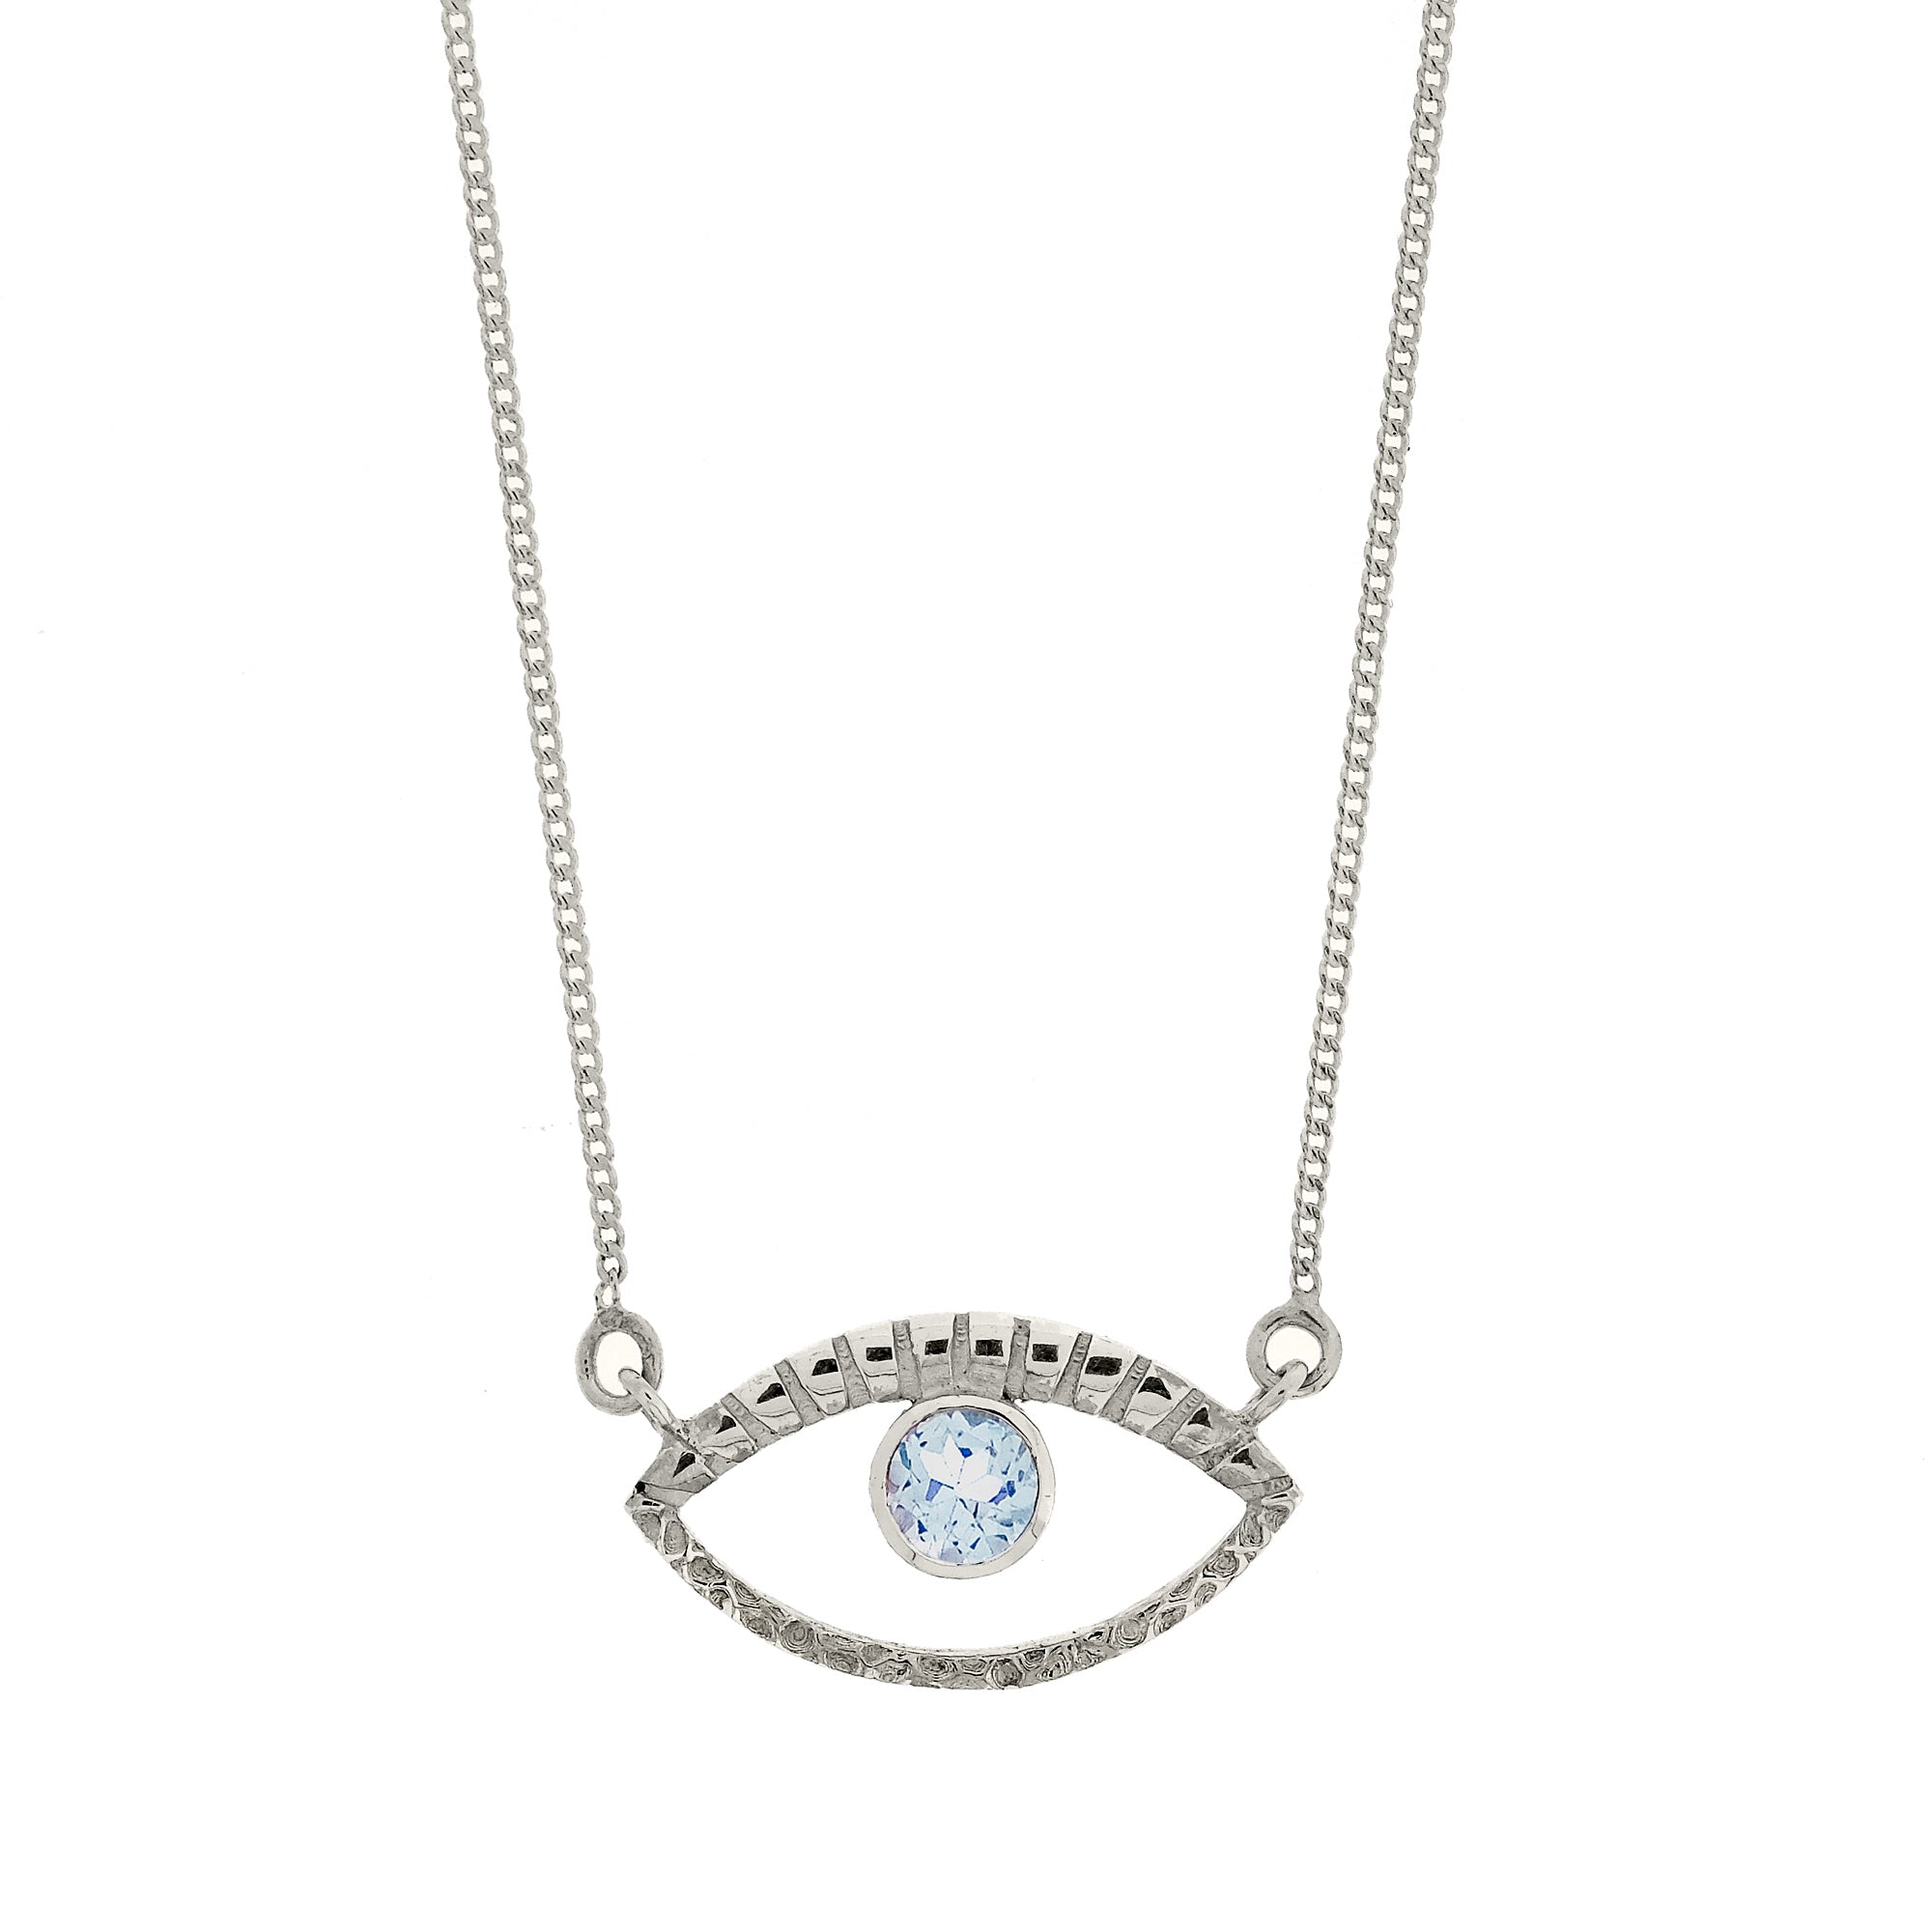 EYE OF INTUITION TOPAZ NECKLACE